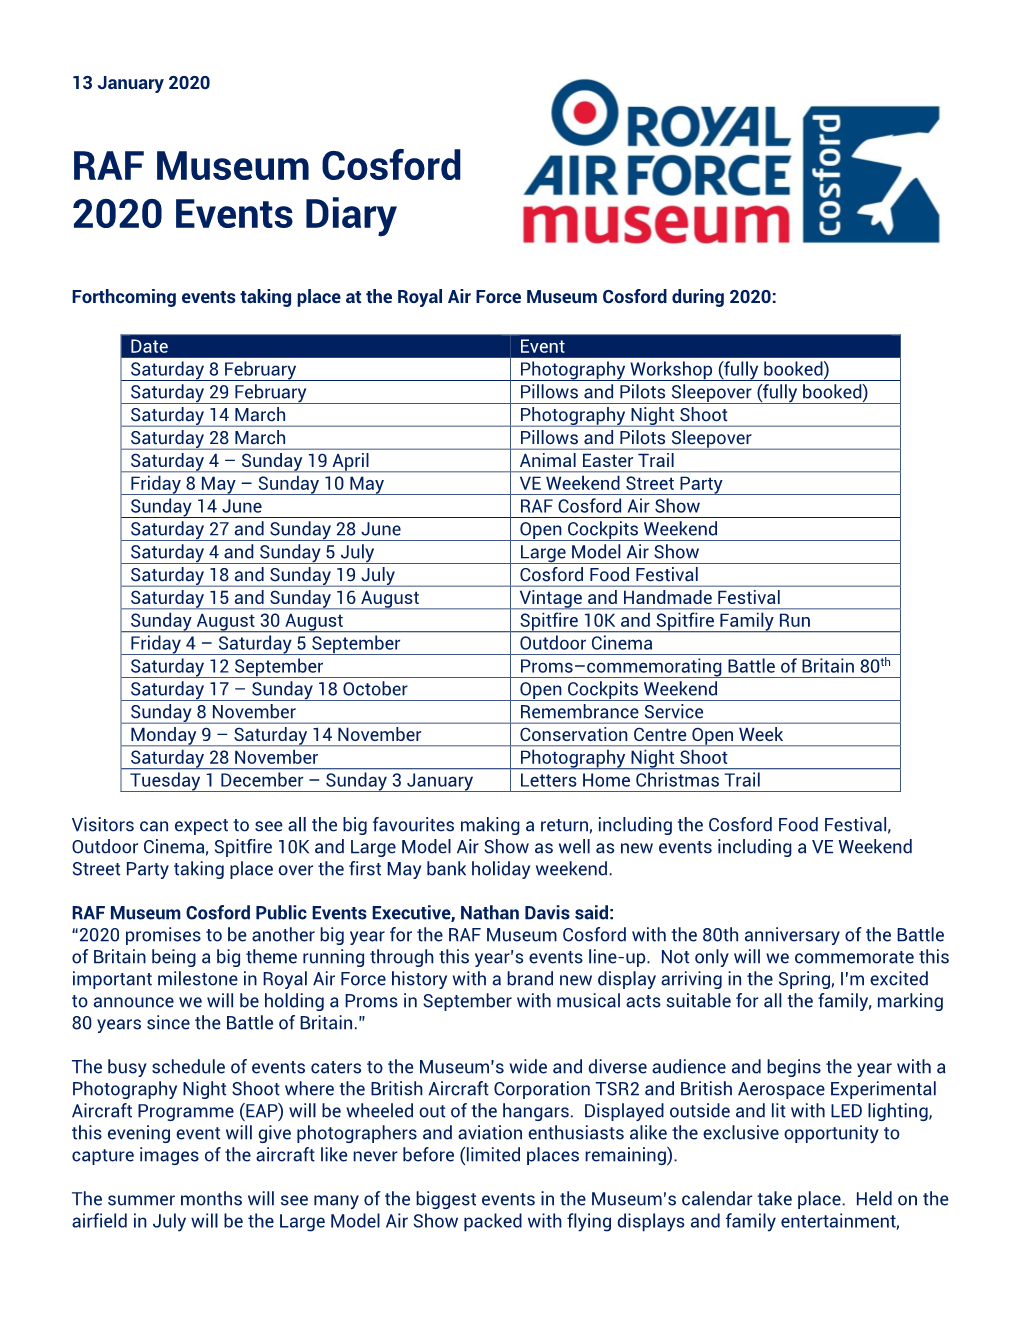 RAF Museum Cosford 2020 Events Diary